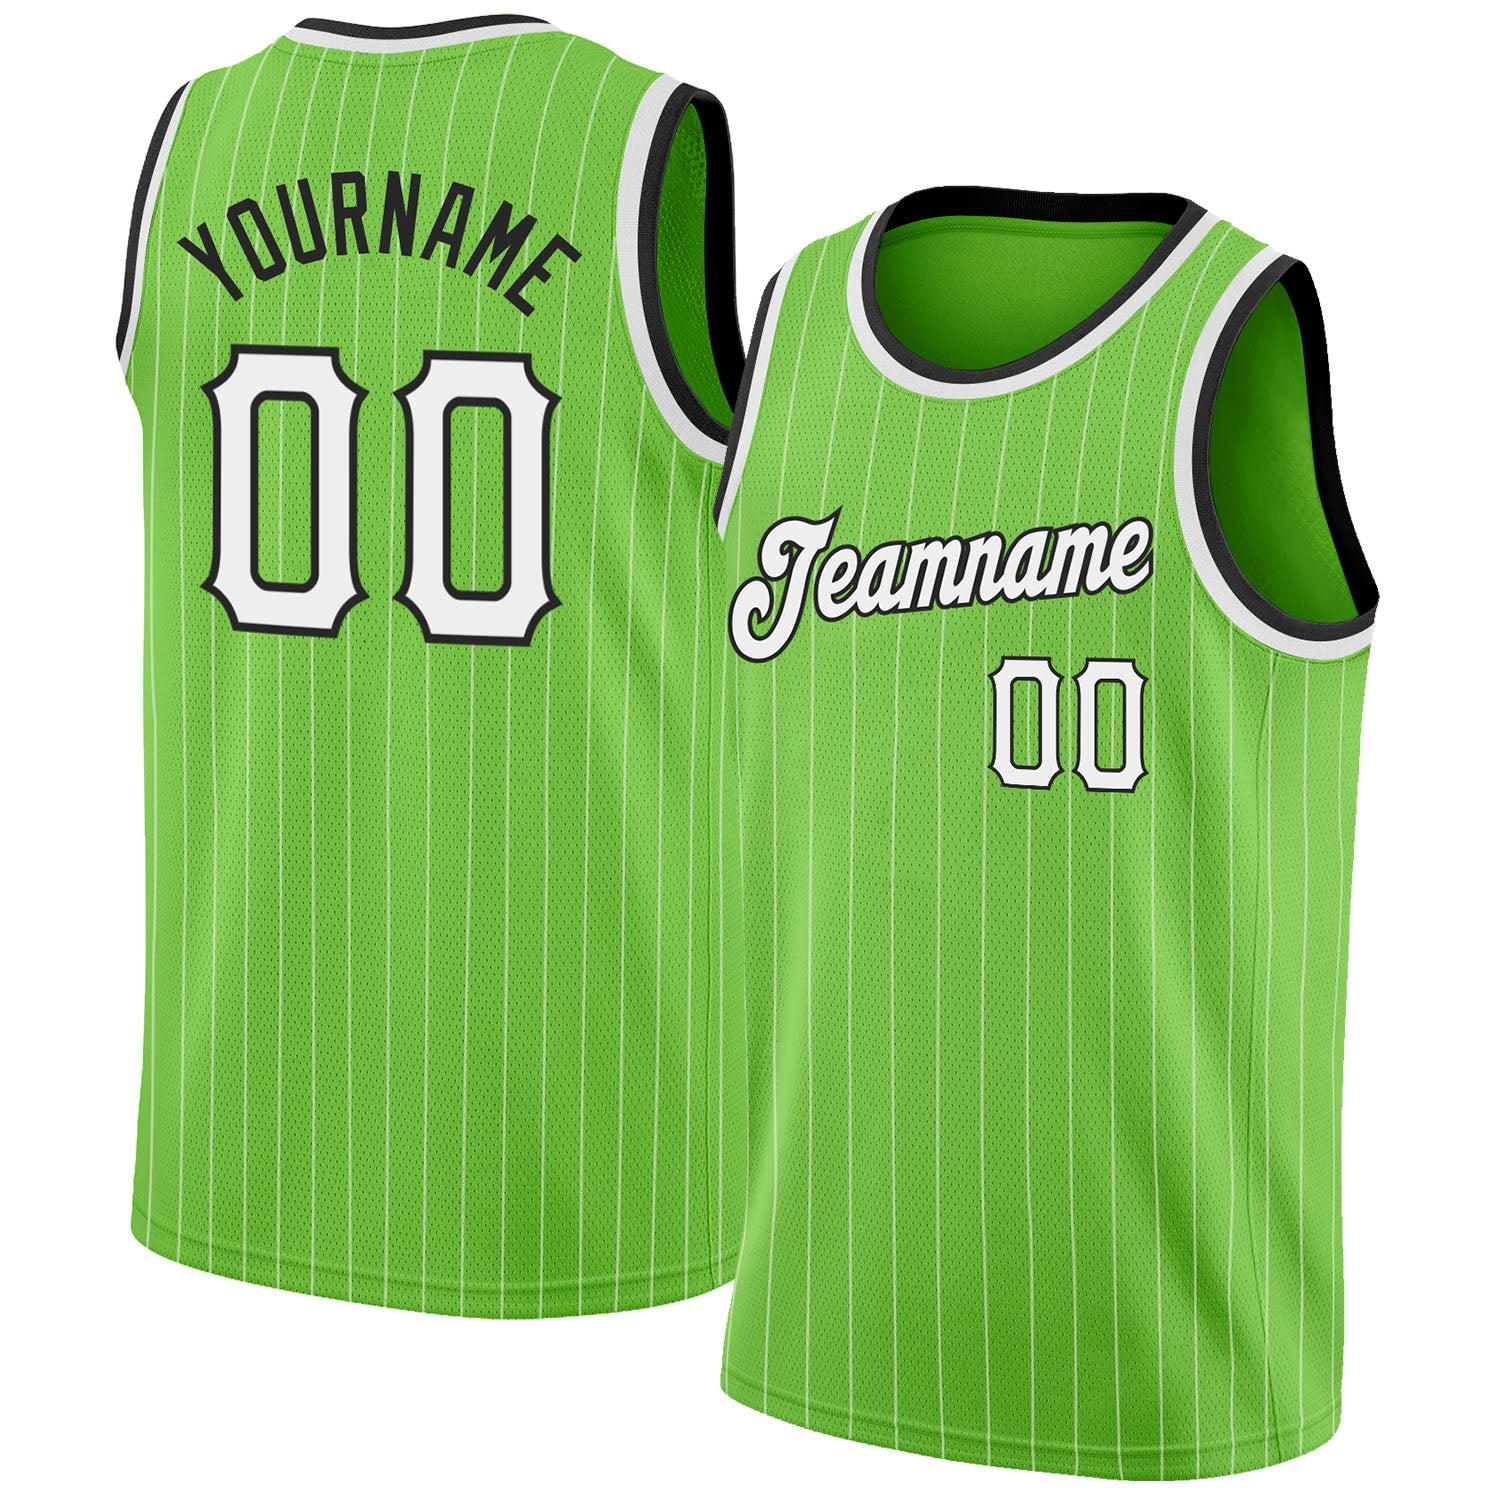 Custom Purple Black Pinstripe White-Teal Authentic Basketball Jersey  Discount